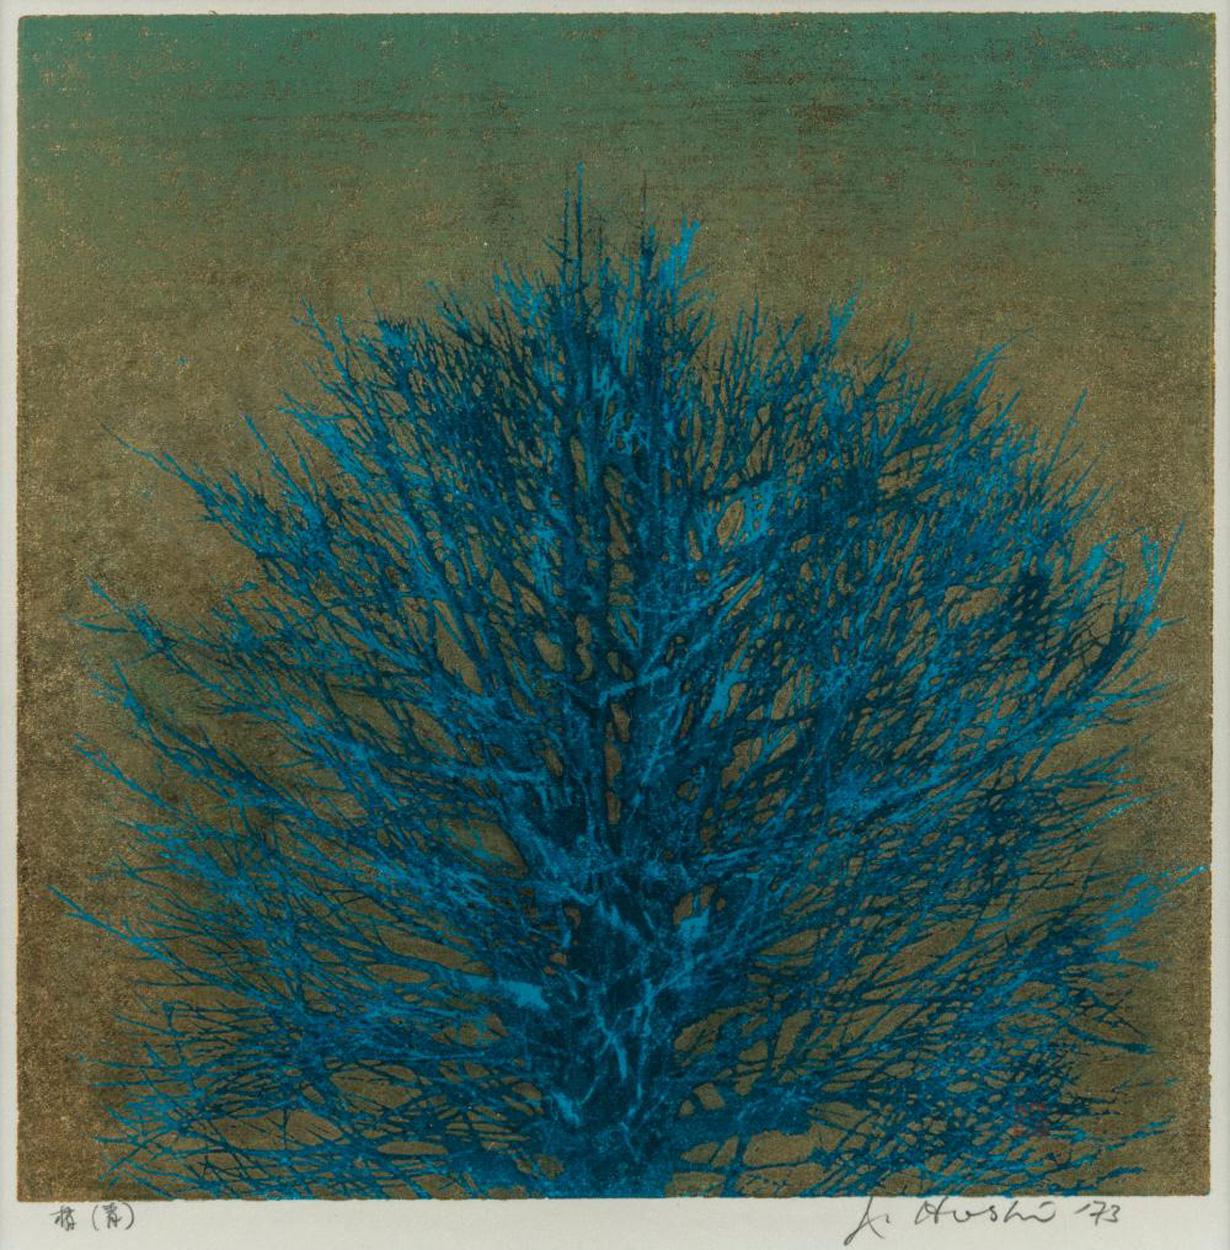  Joichi Hoshi Blue Tree Top woodblock with gold pigment.  This is a fine example of the artists genre.

Joichi Hoshi was born in Niigata, Japan in 1913. He worked as a teacher in Taiwan for 13 years. However, at the end of world war II the Japanese